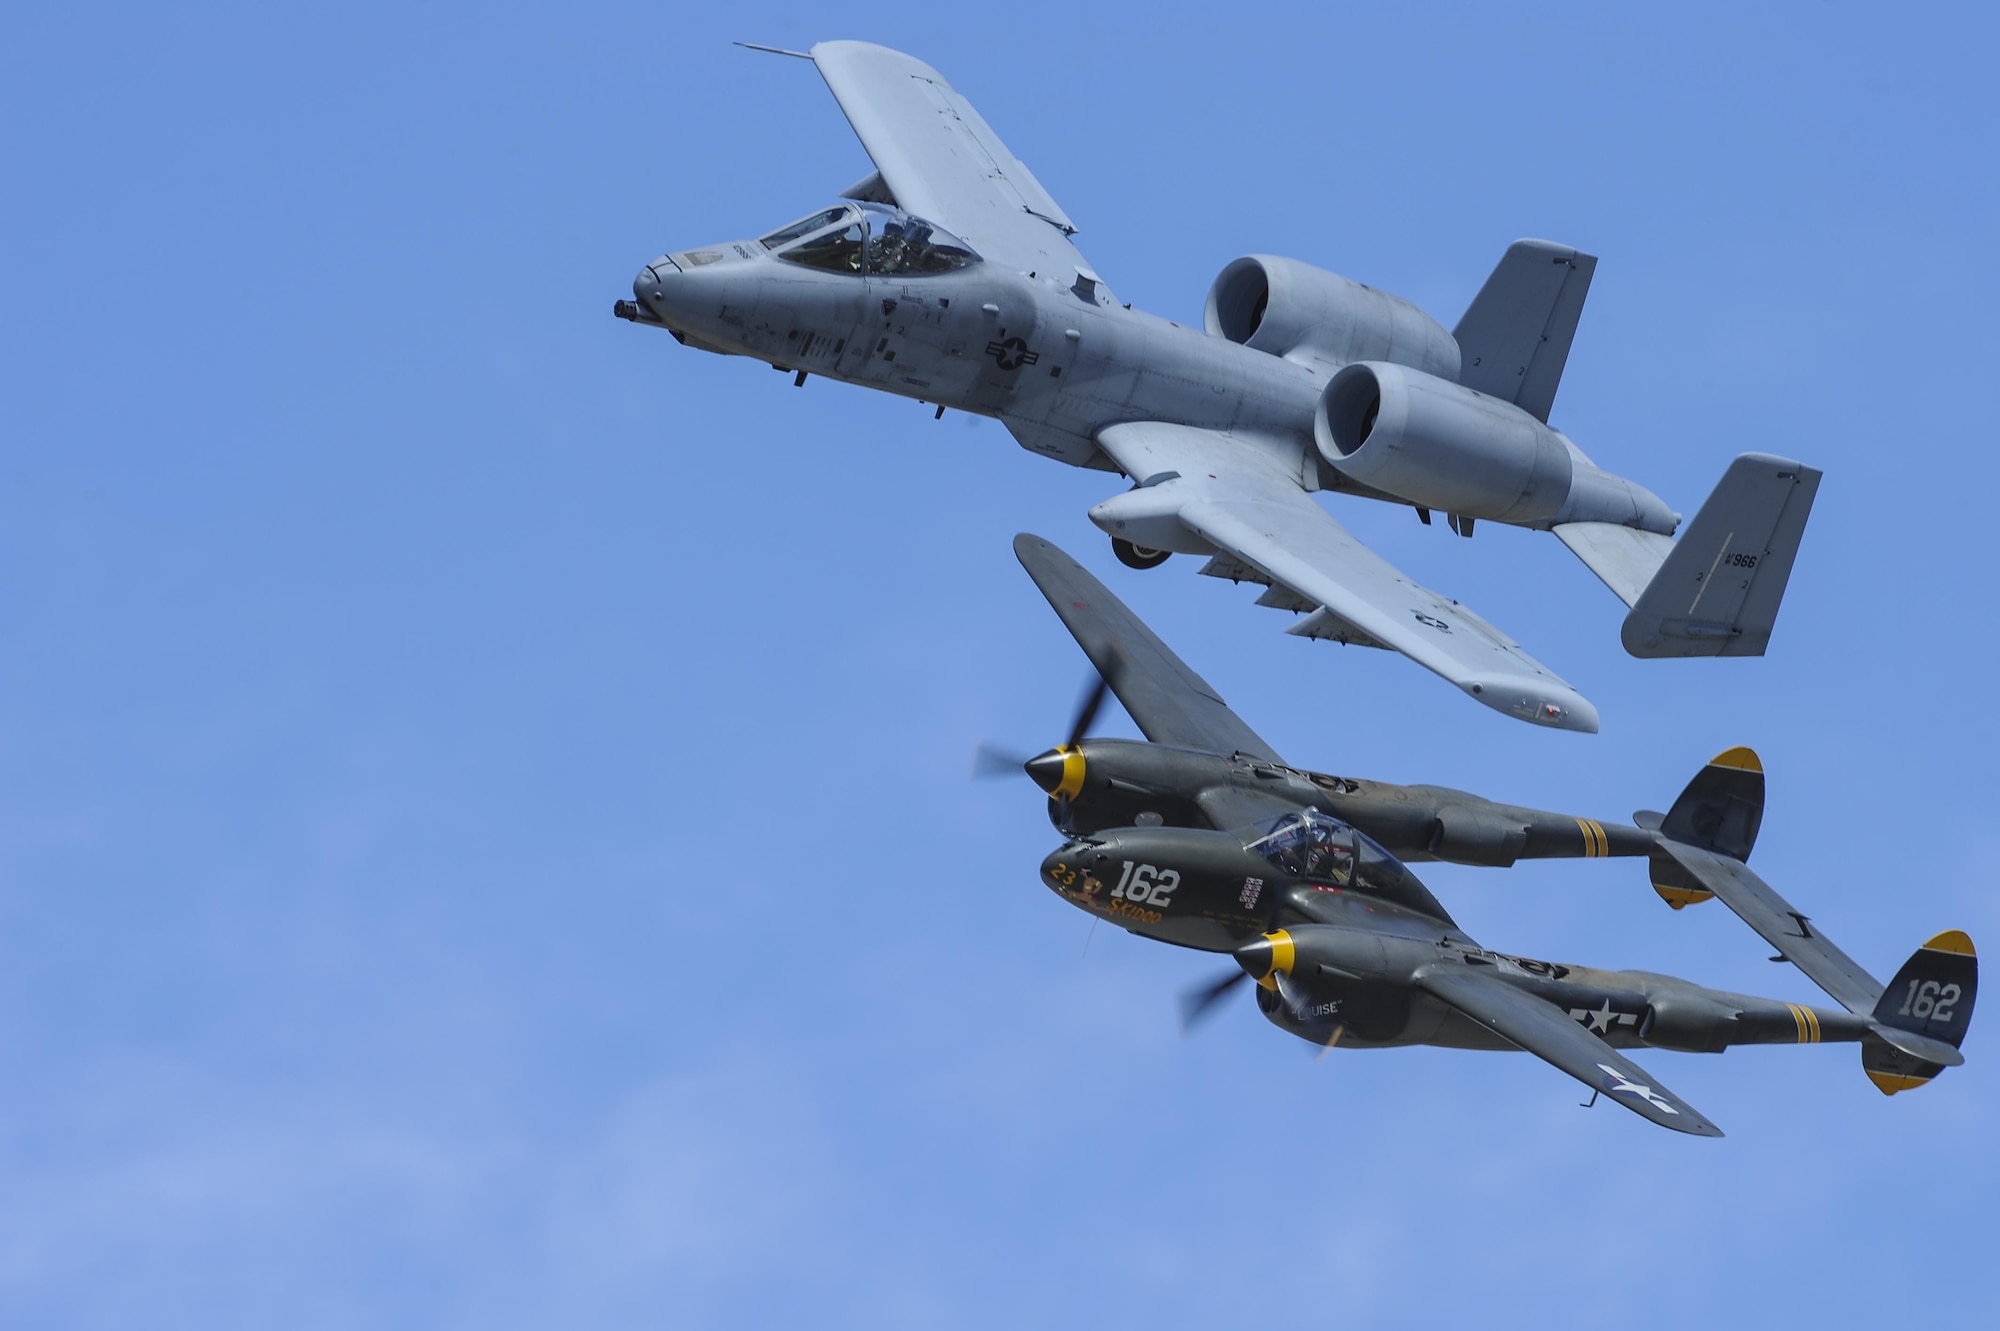 A U.S. Air Force A-10C Thunderbolt II, assigned to the 354th Fighter Squadron and a part of the A-10 West Heritage Flight Team, and a P-38 Lightning fly in formation during the Los Angeles County Air Show in Lancaster, Calif., March 26, 2017. The A-10 WHFT is scheduled to perform in 9 more air shows throughout the U.S. this year after resurging from a 5-year-long inactivation period. (U.S. Air Force photo by Airman 1st Class Mya M. Crosby)